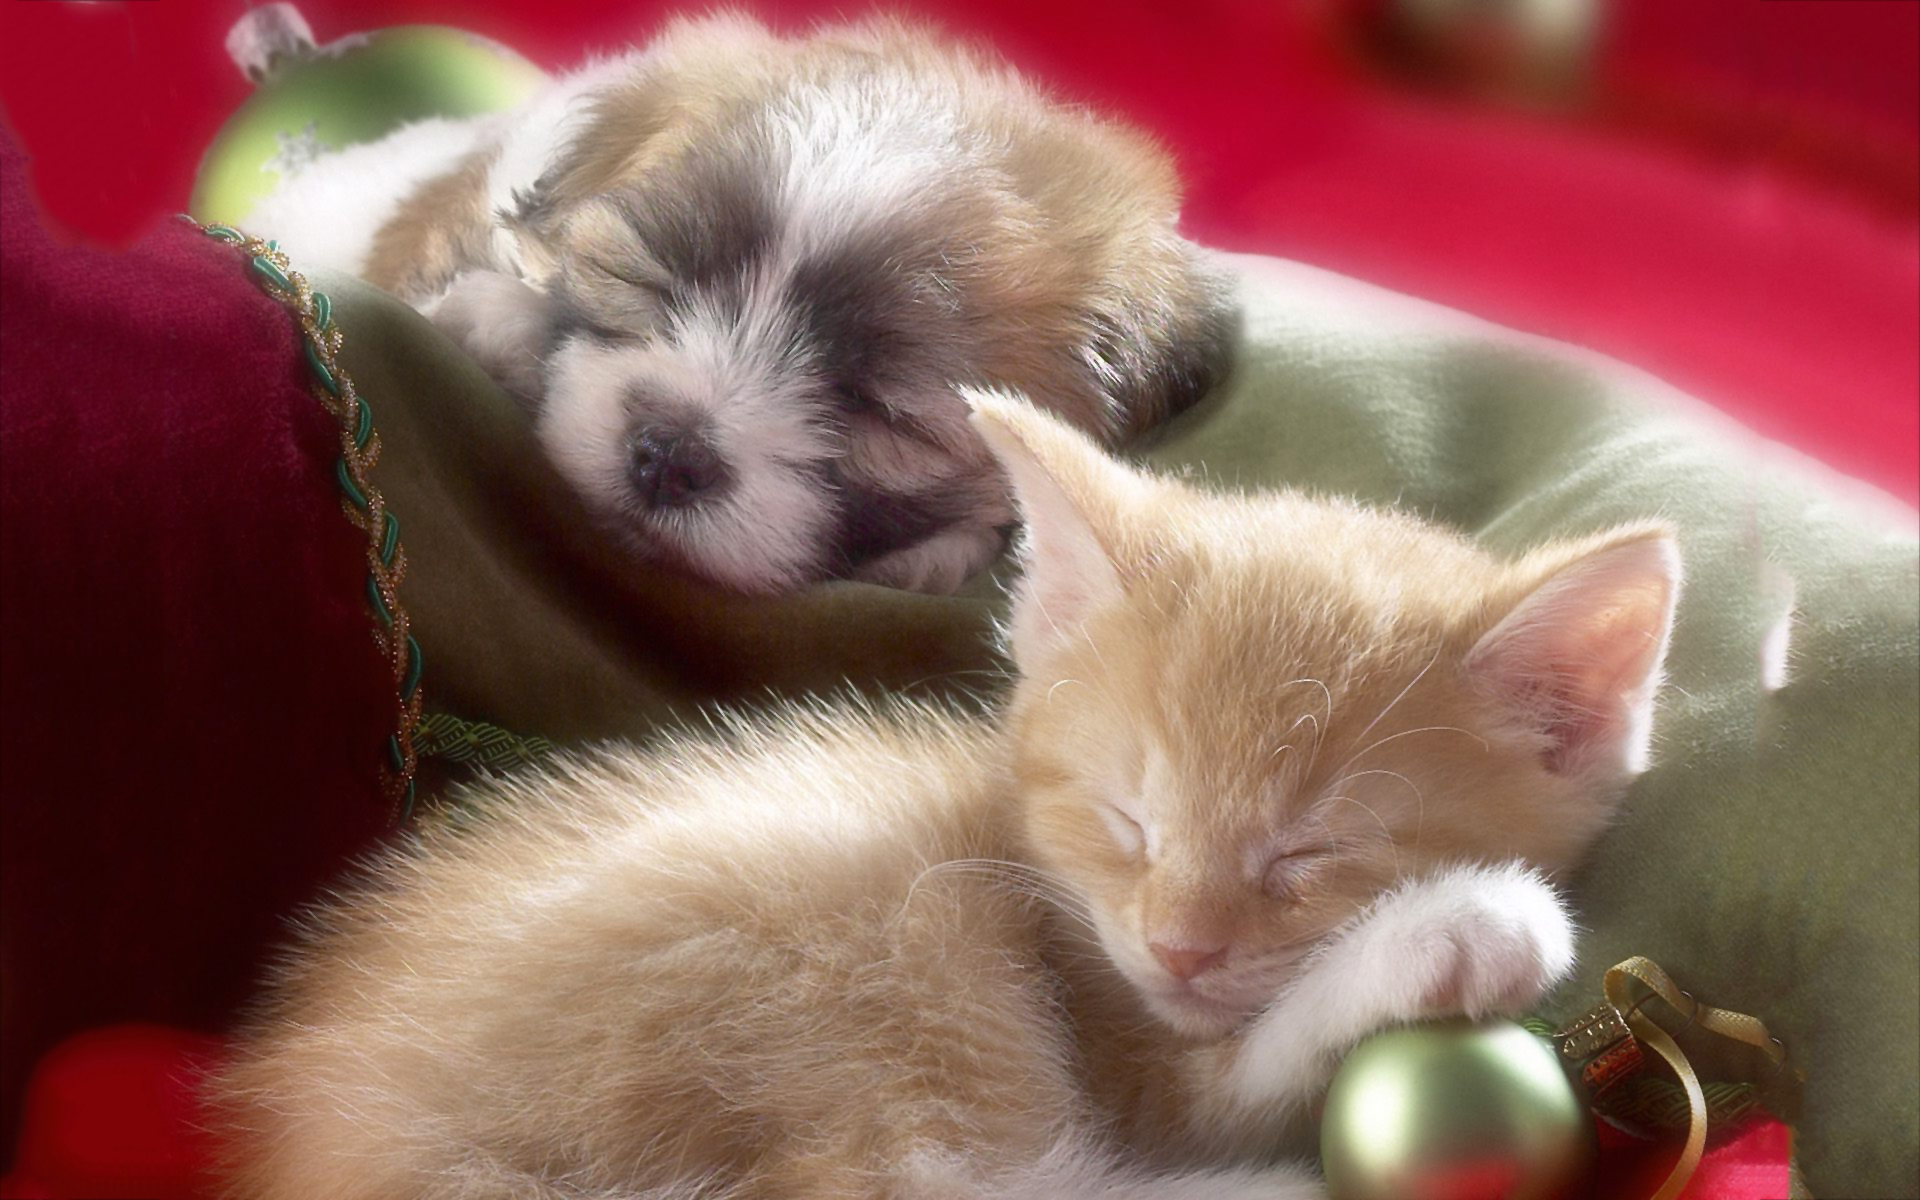 Sleeping Kitten Puppy Wallpapers Pictures Photos Images - PetPictures